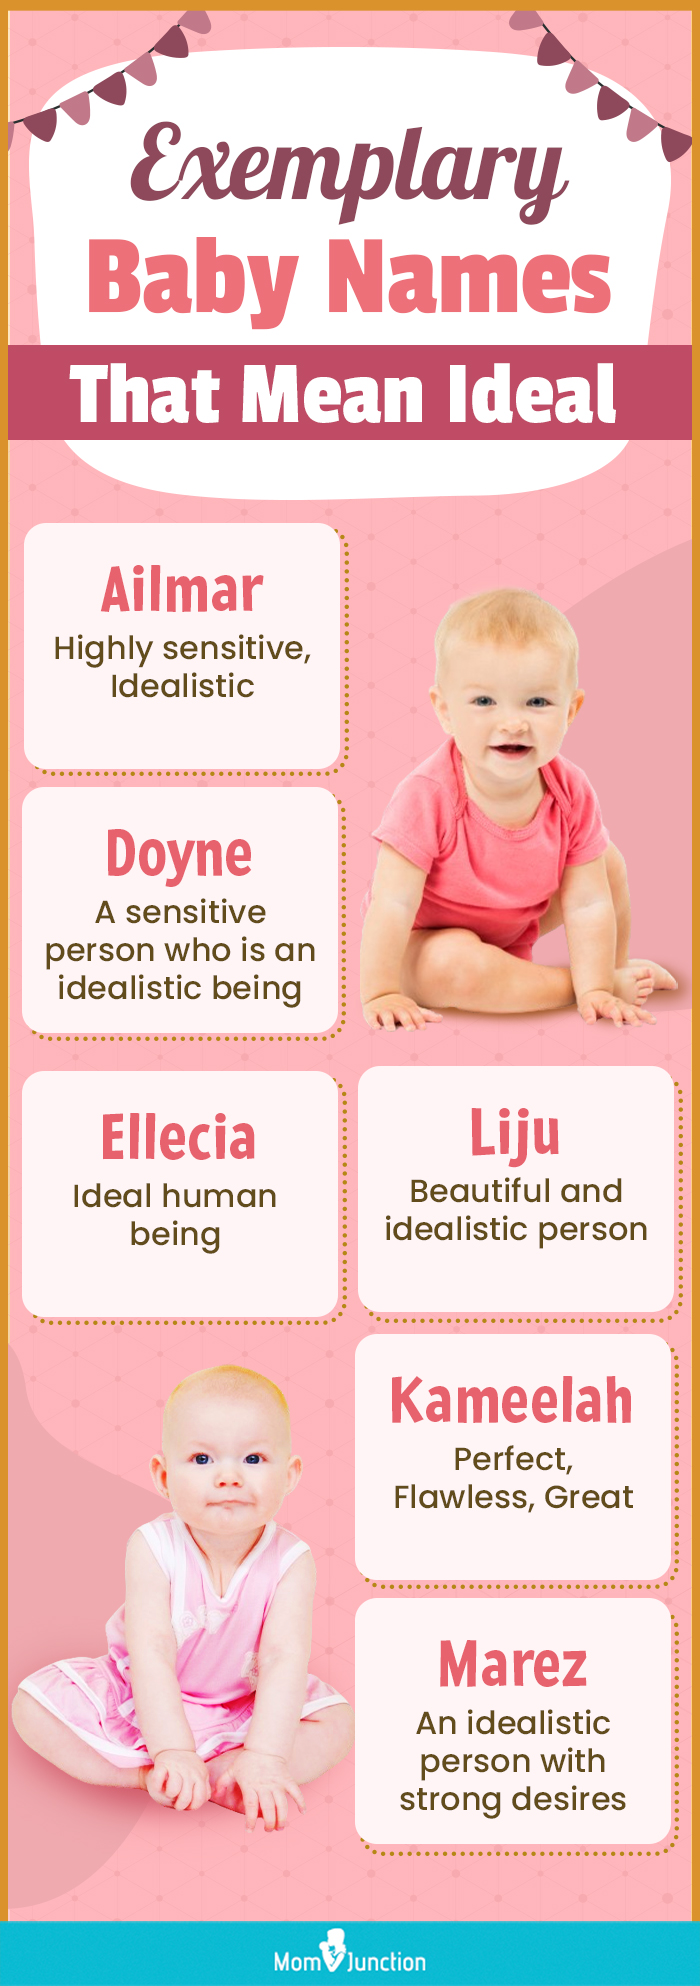 Exemplary Baby Names That Mean Ideal (infographic)